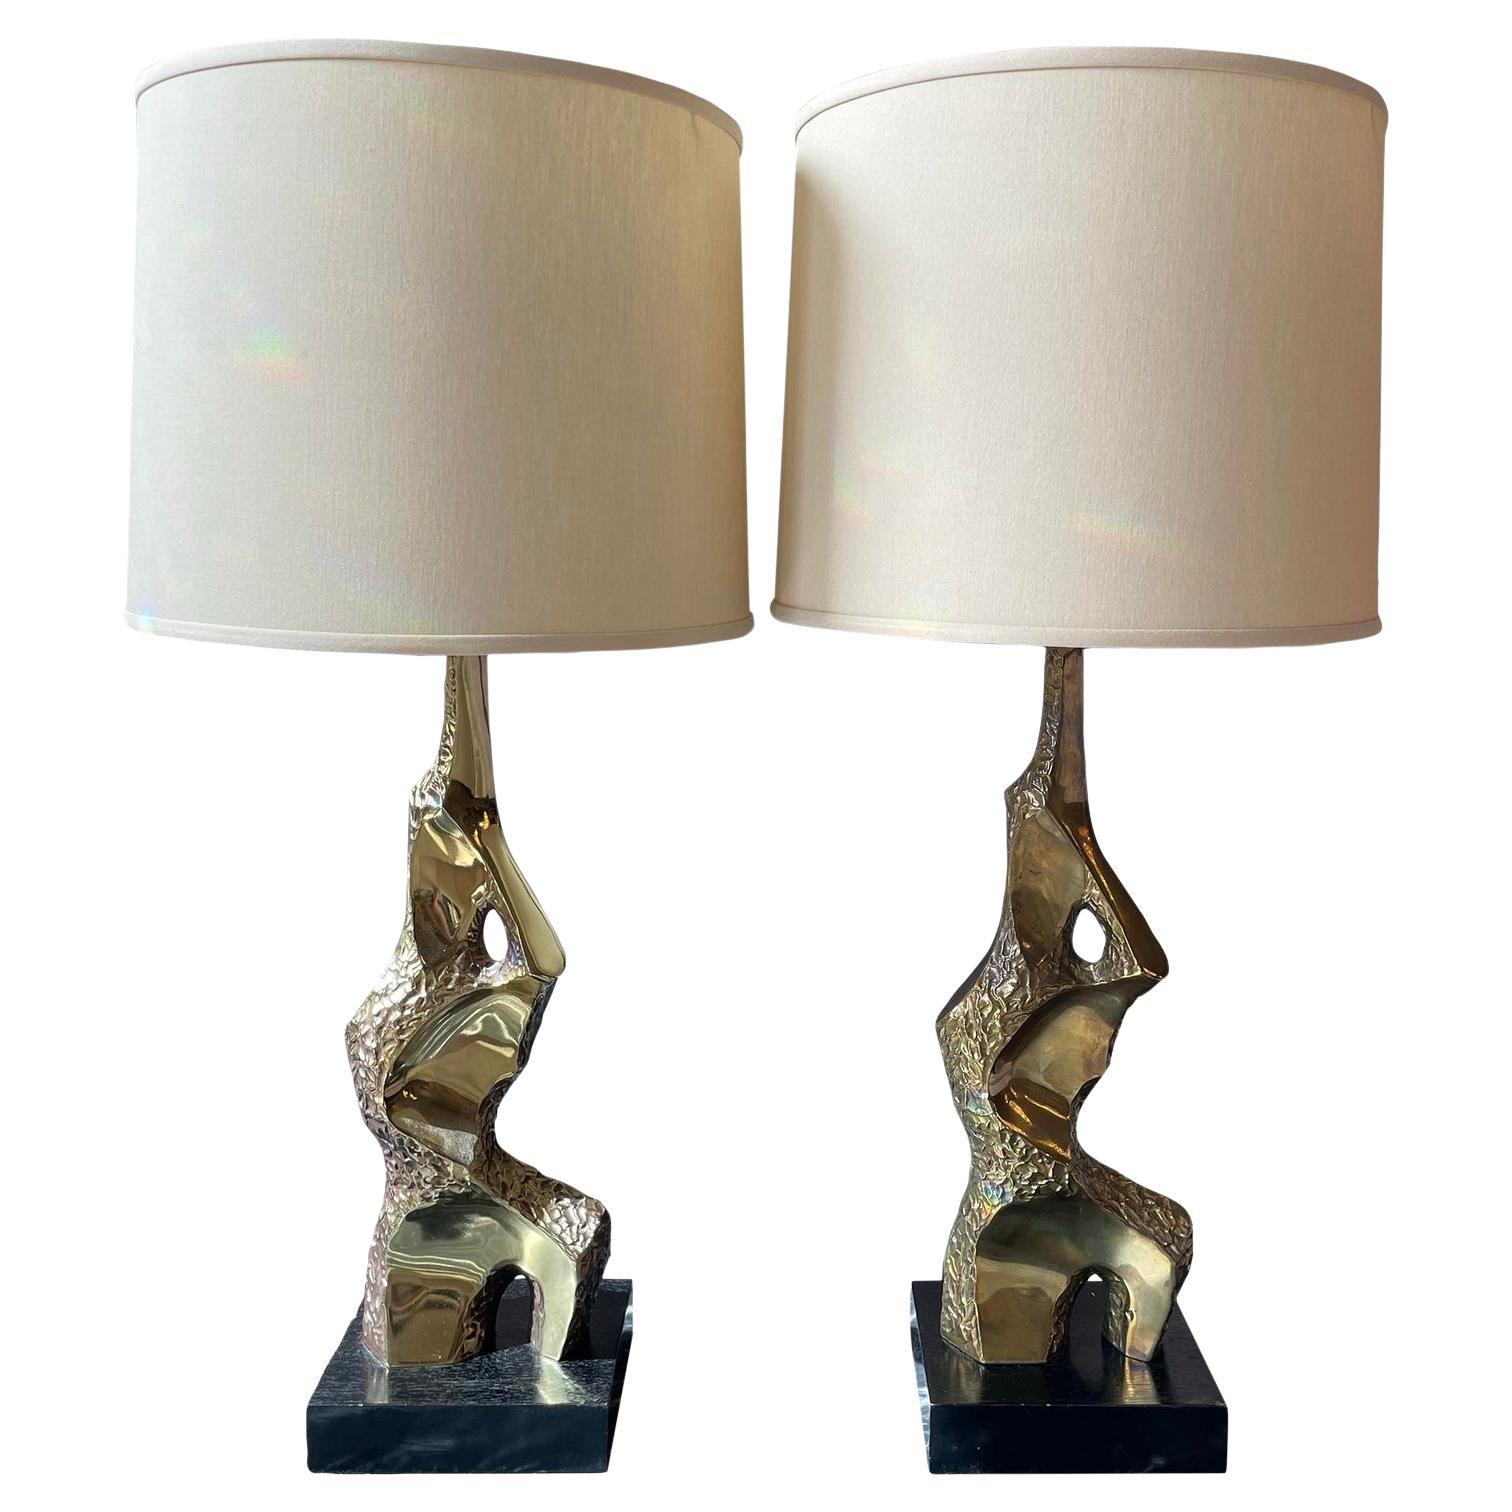 1970s Brutalist Brass Lamps by Laurel Lamp Company - a Pair For Sale